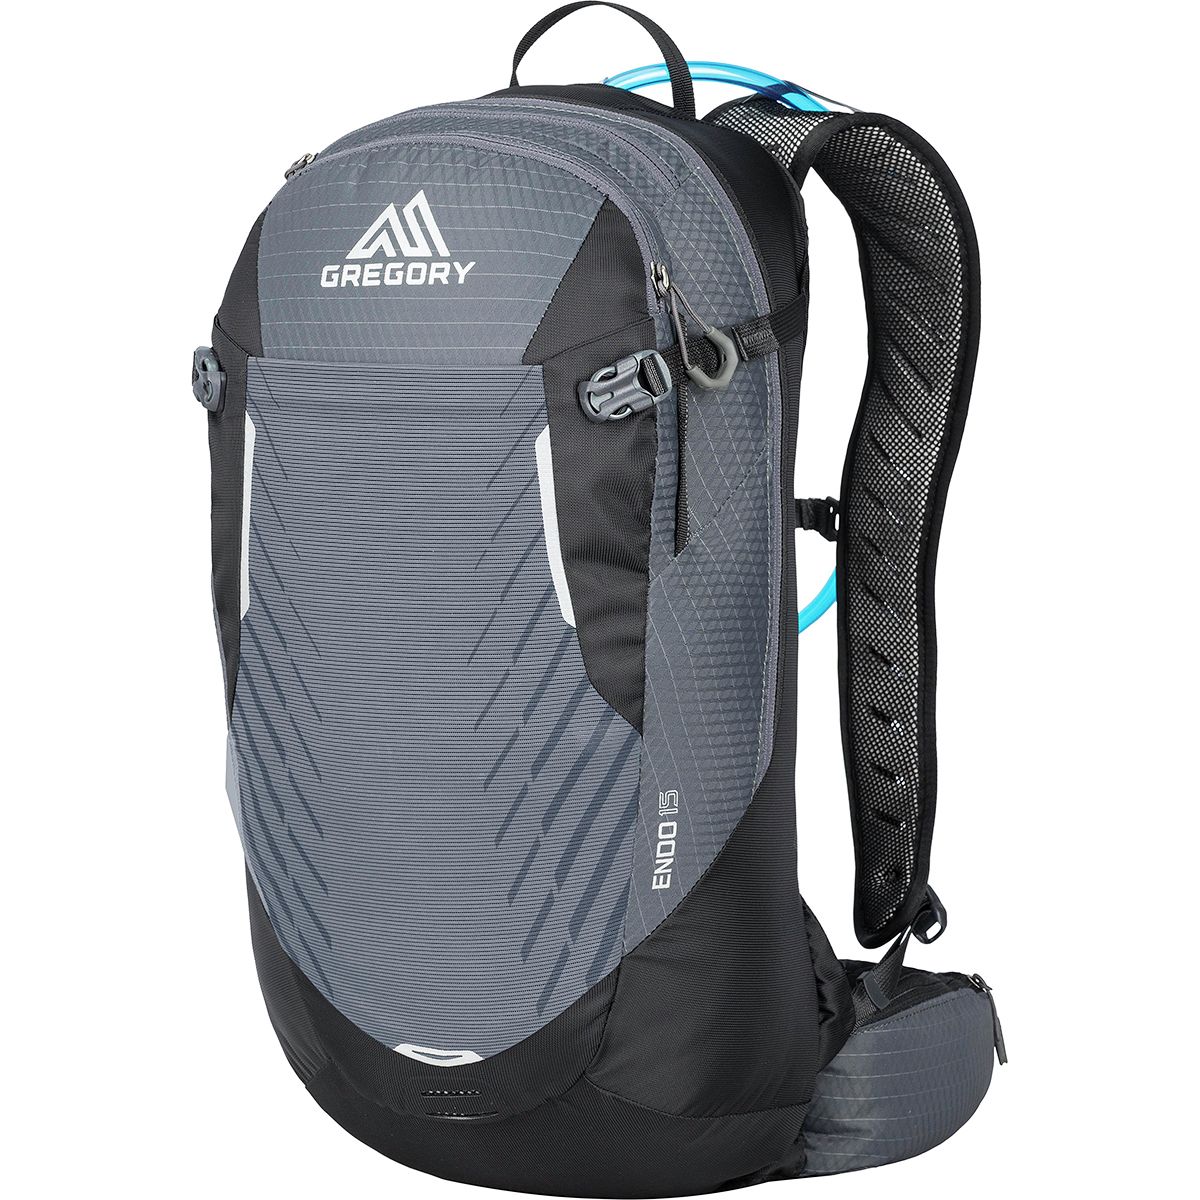 Gregory Endo 15L Hydration Backpack